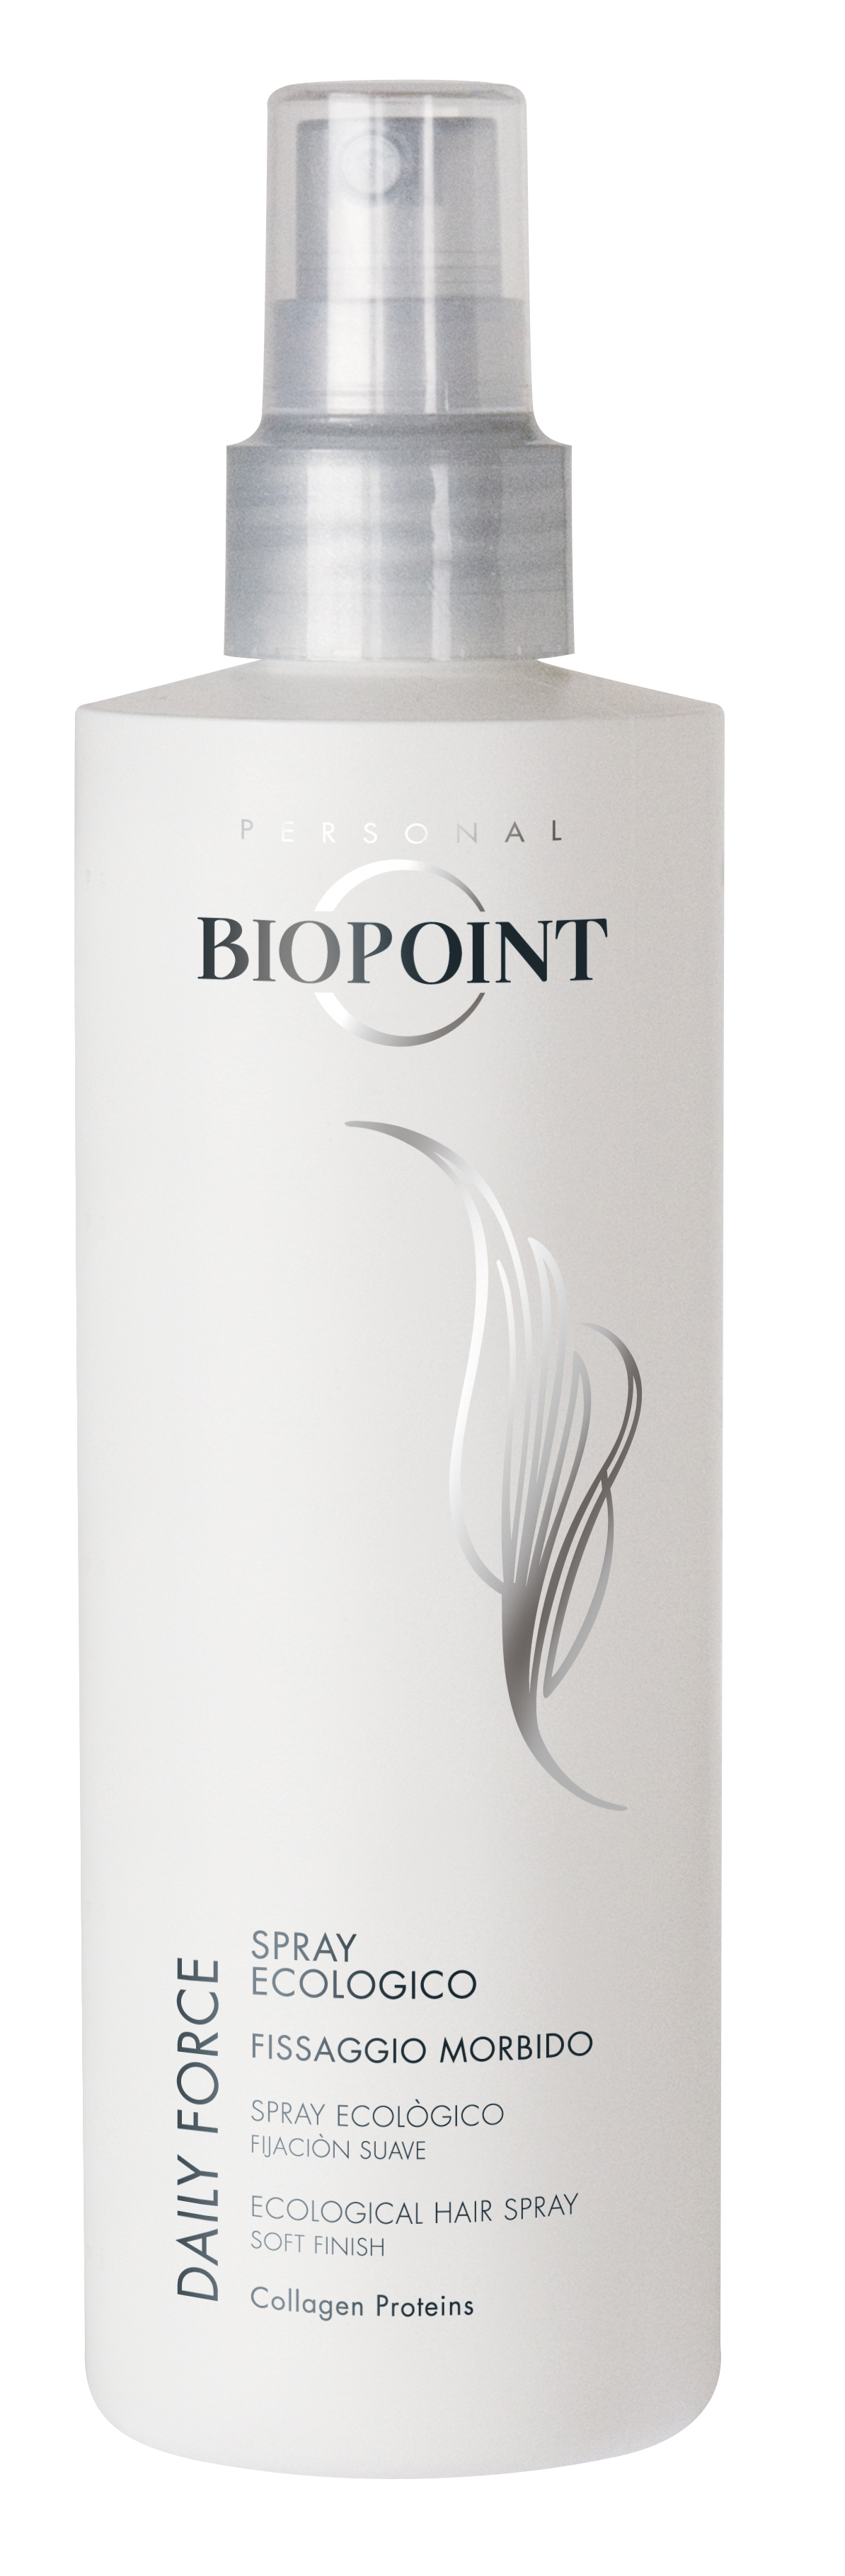 BIOPOINT PV04019